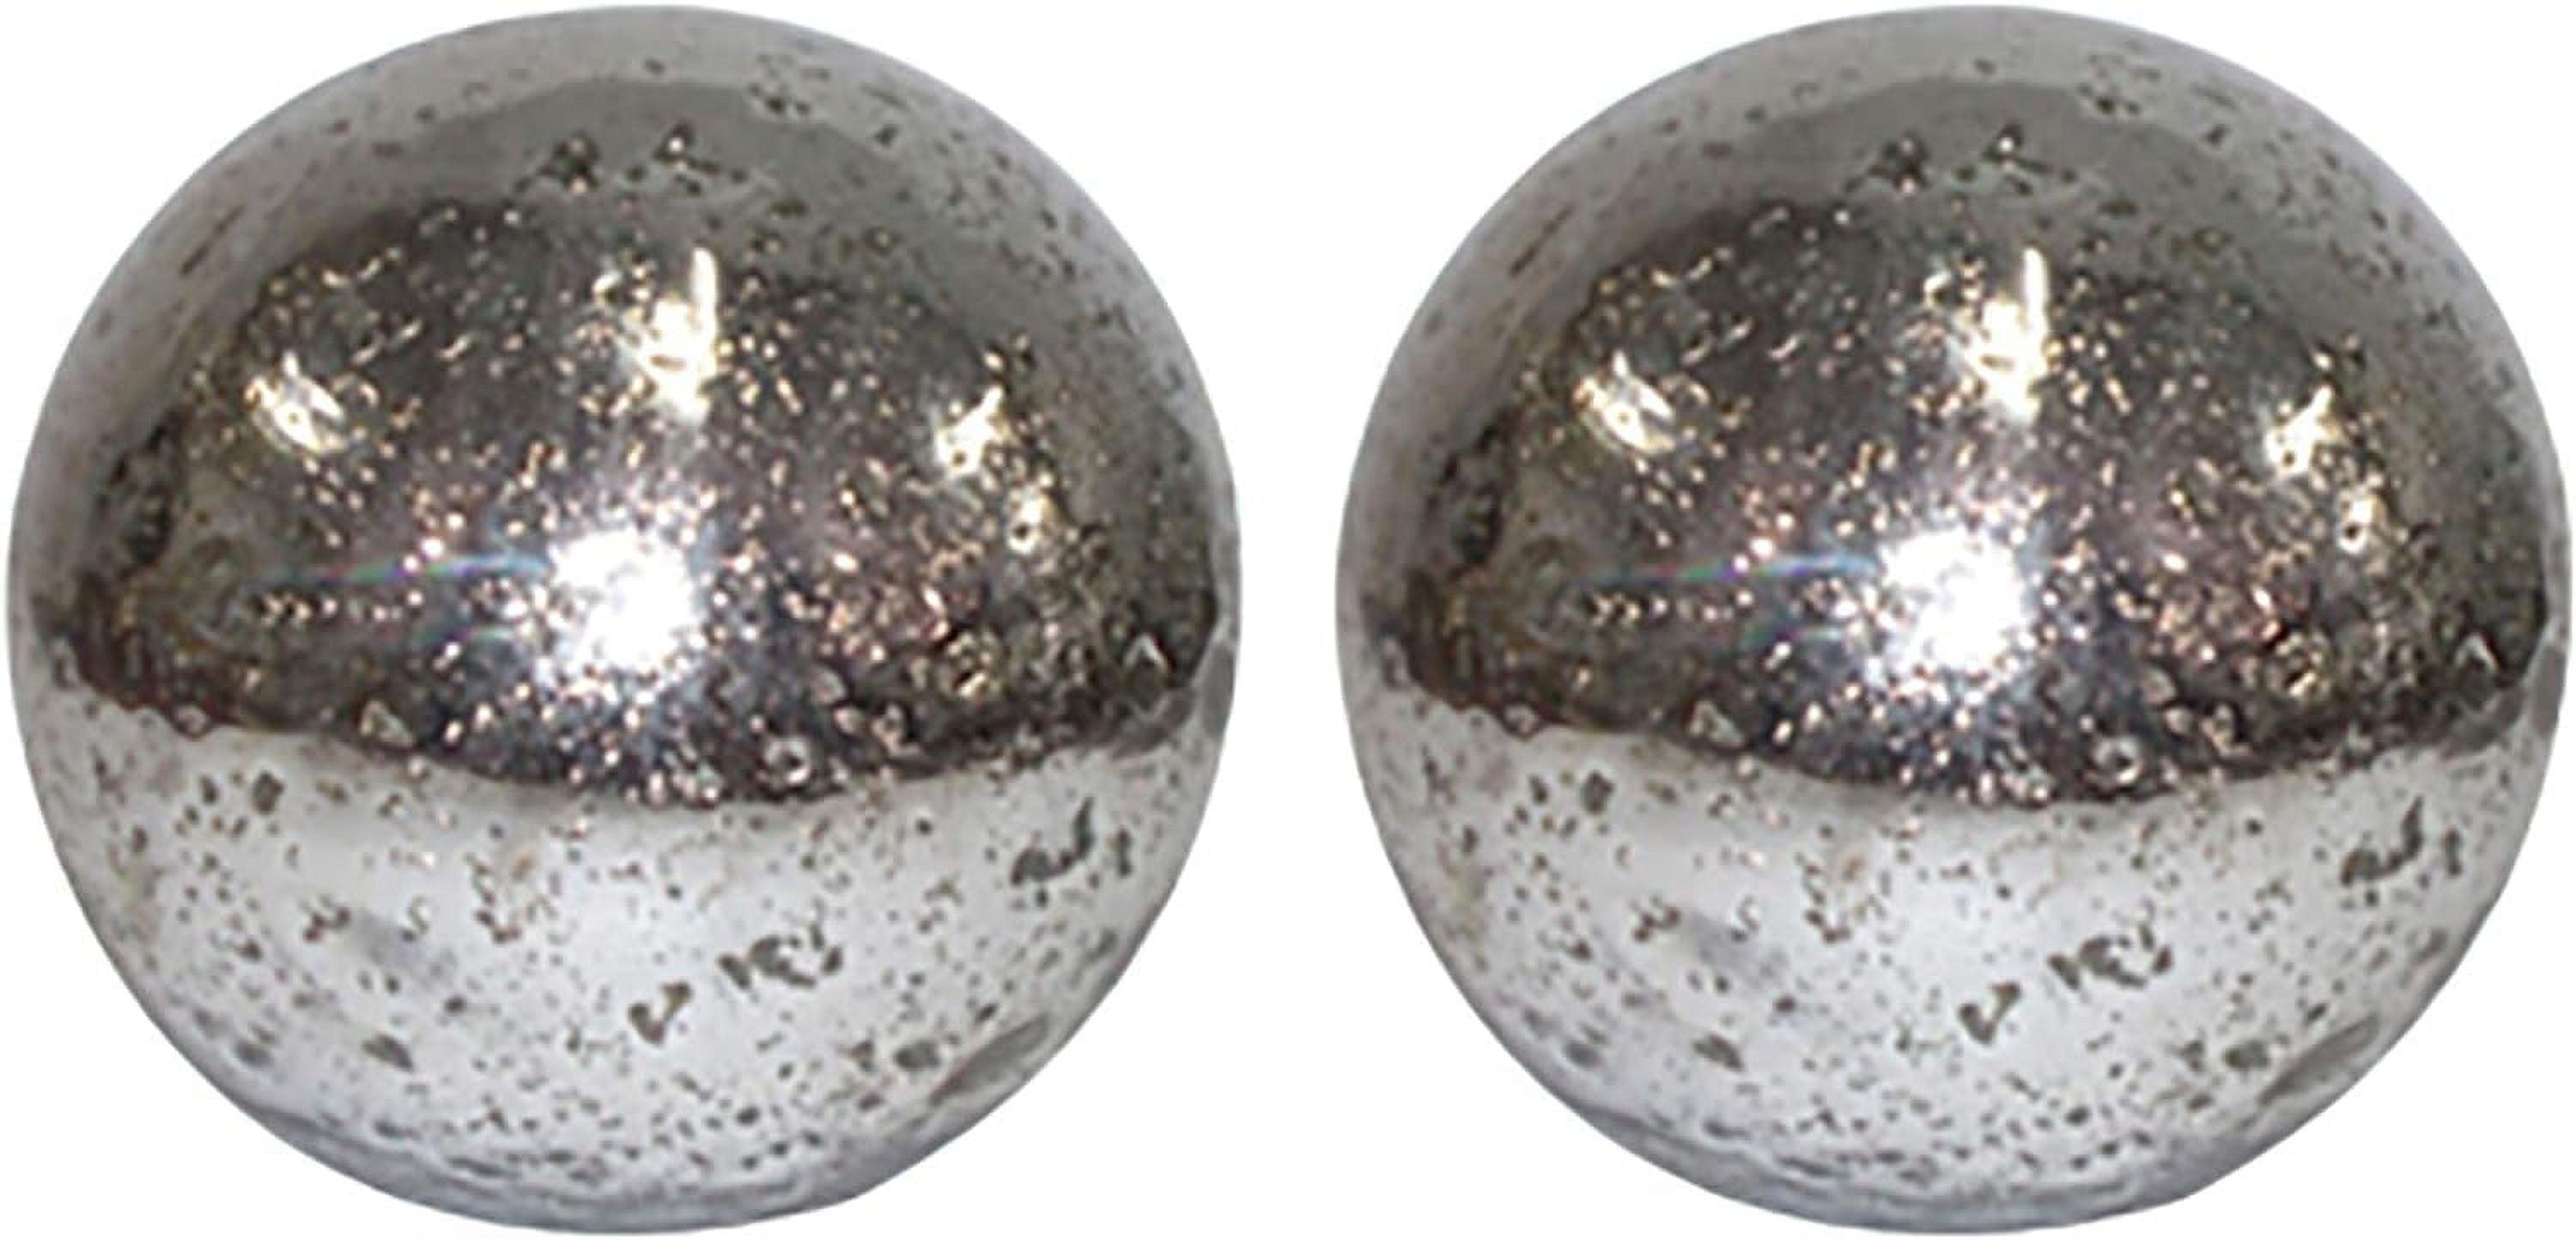 Distressed Silver 8" Glass Sphere Wall Decor Set